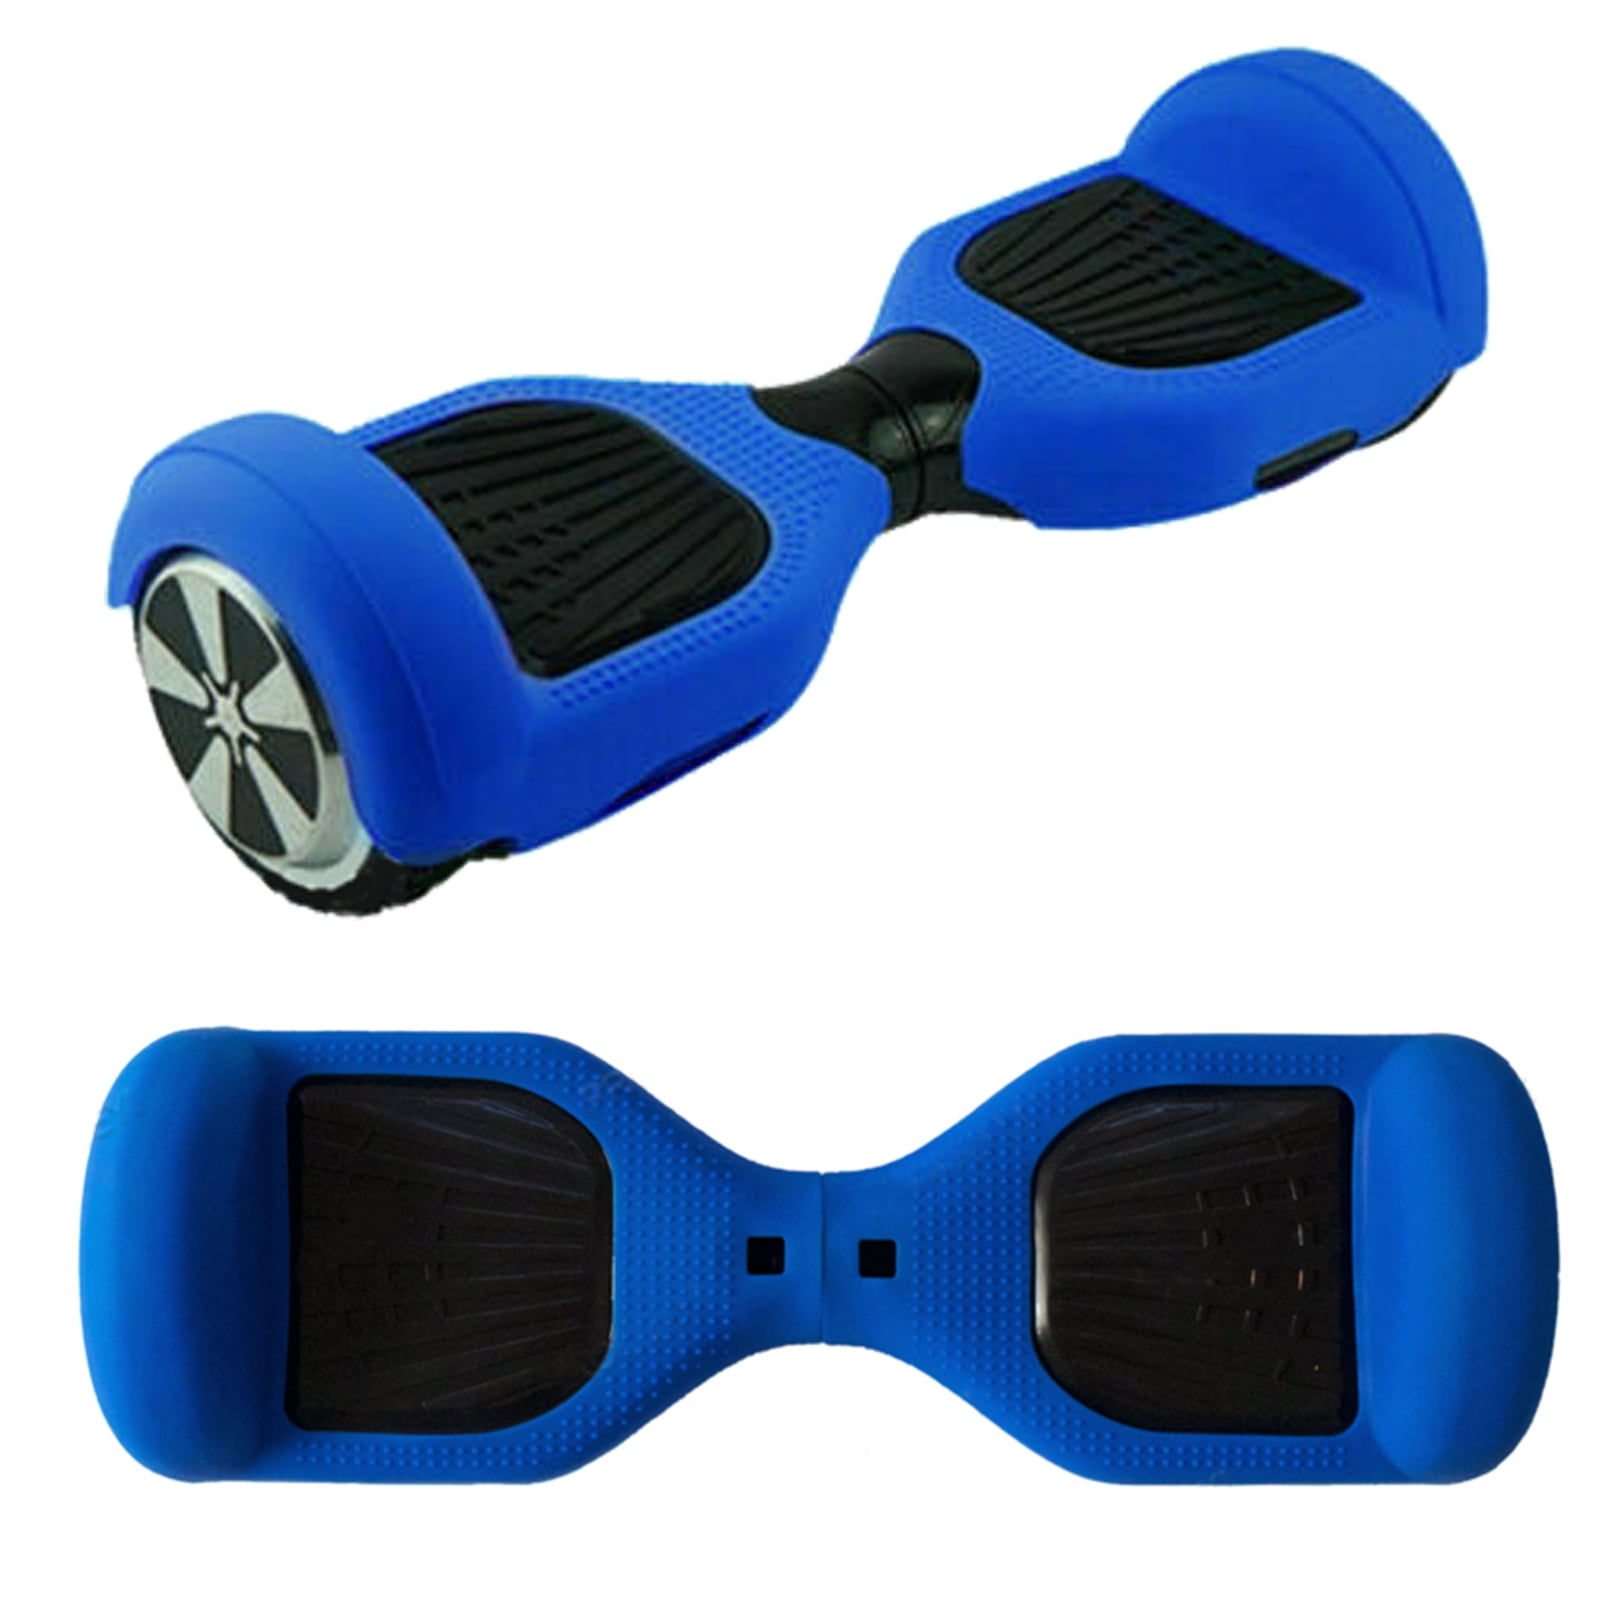 Silicone Protective Case Cover For 6.5" Self Balancing Scooter Hoverboard Black 